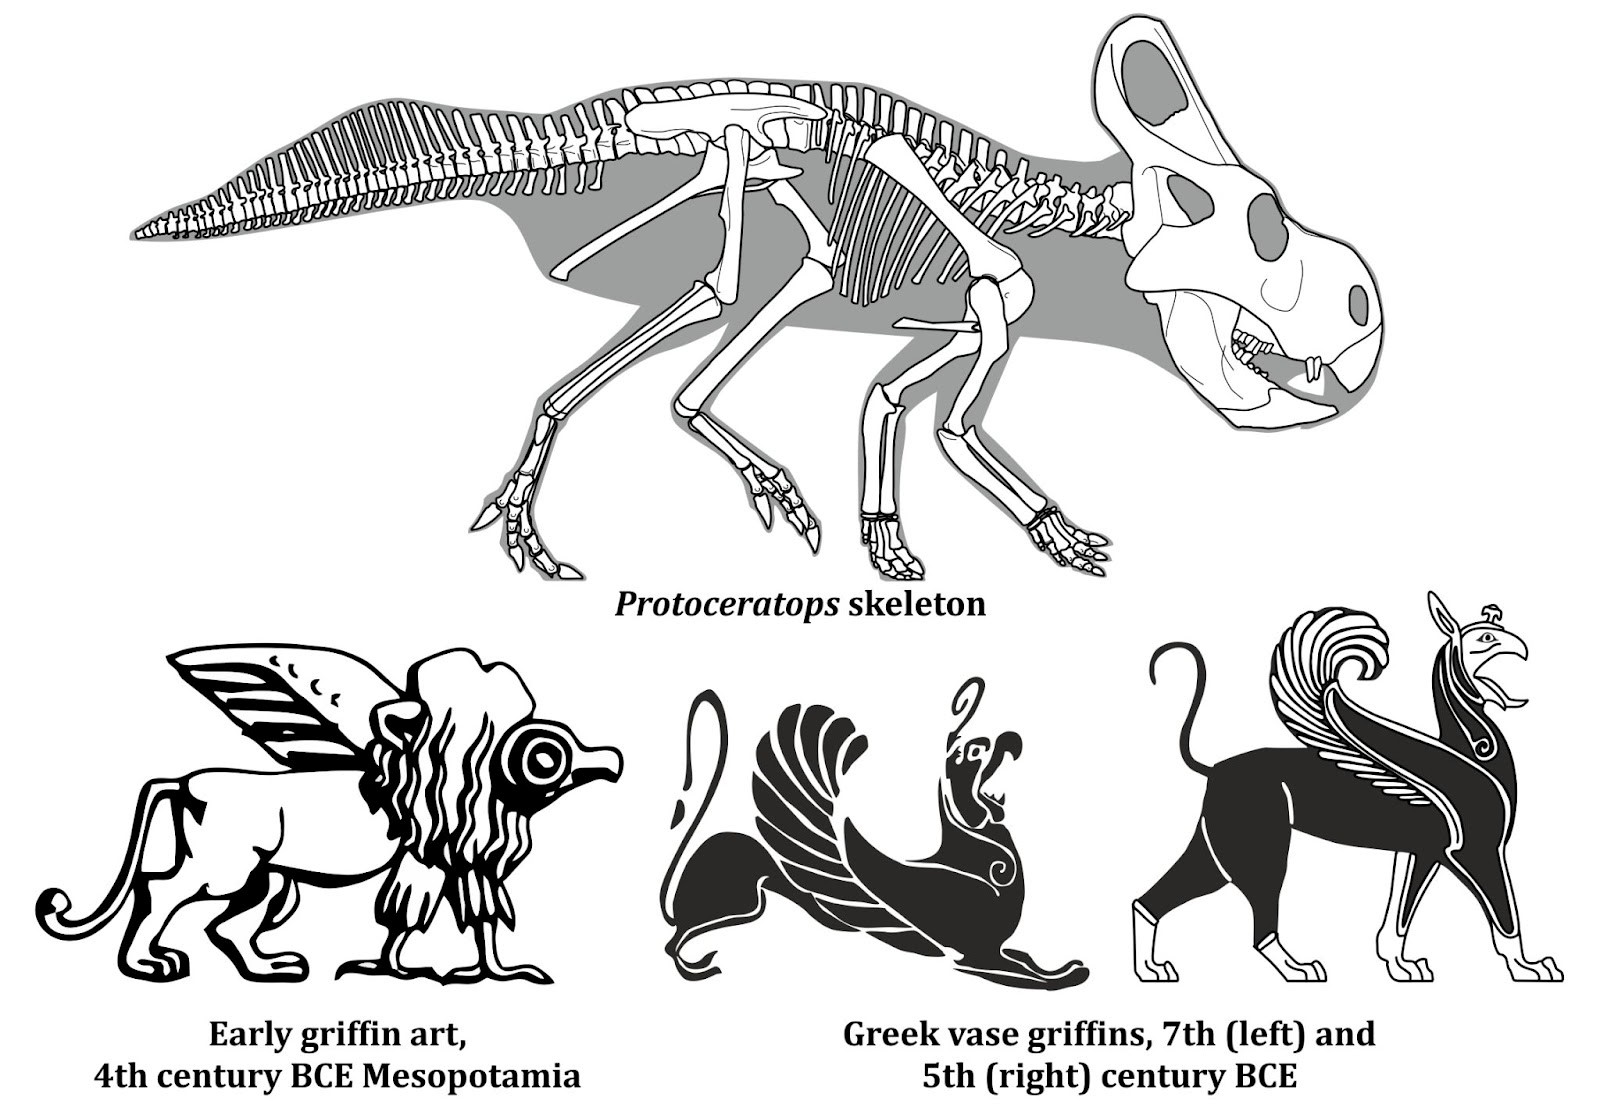 Comparison between griffins and Protoceratops